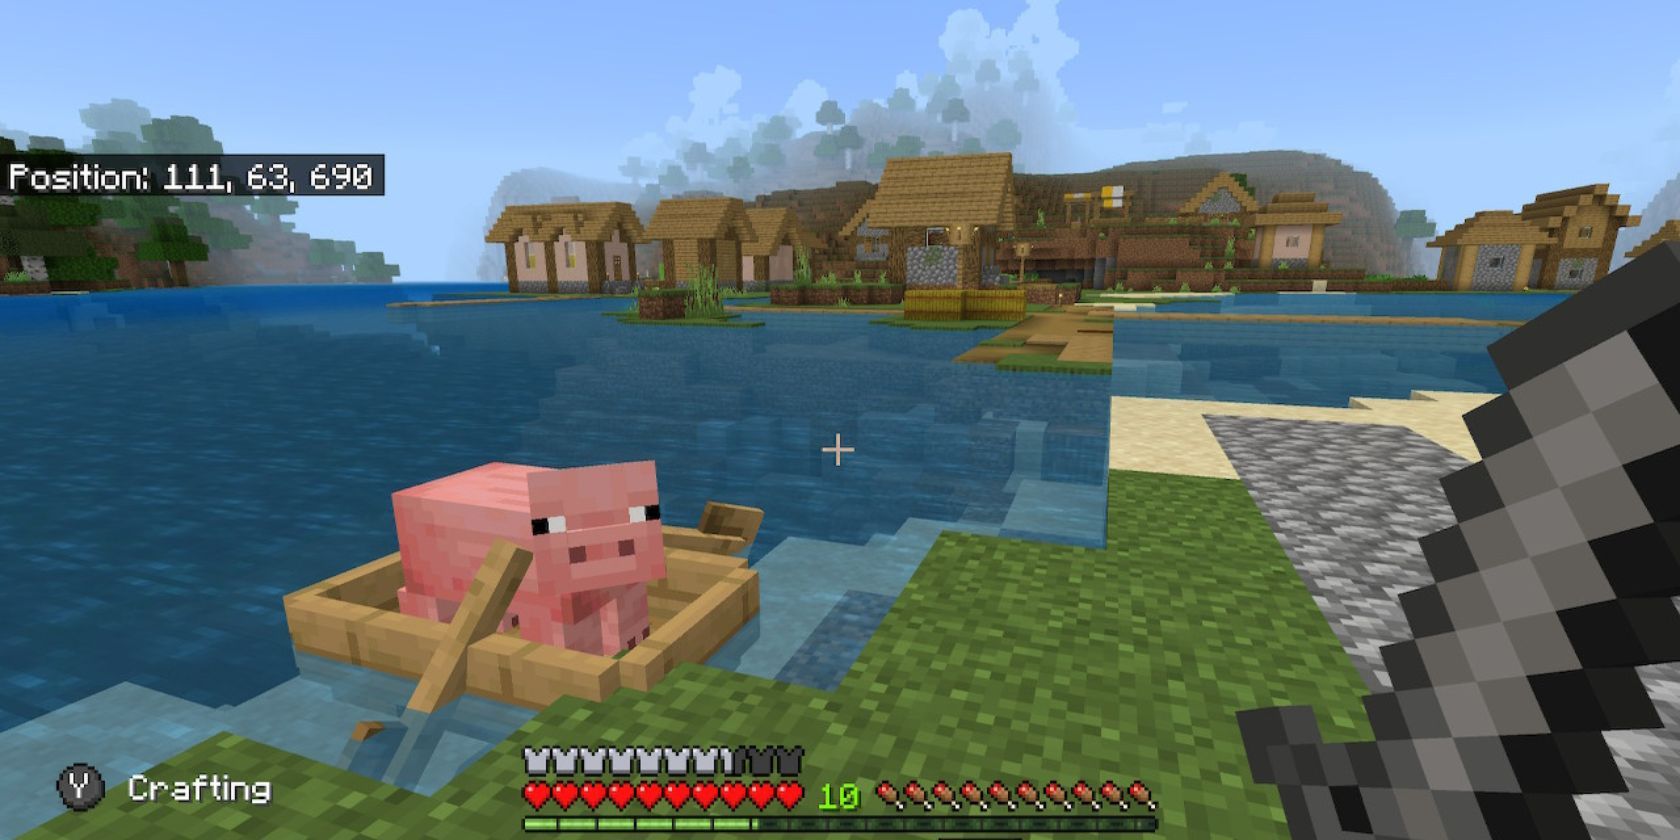 A pig in a boat in Minecraft